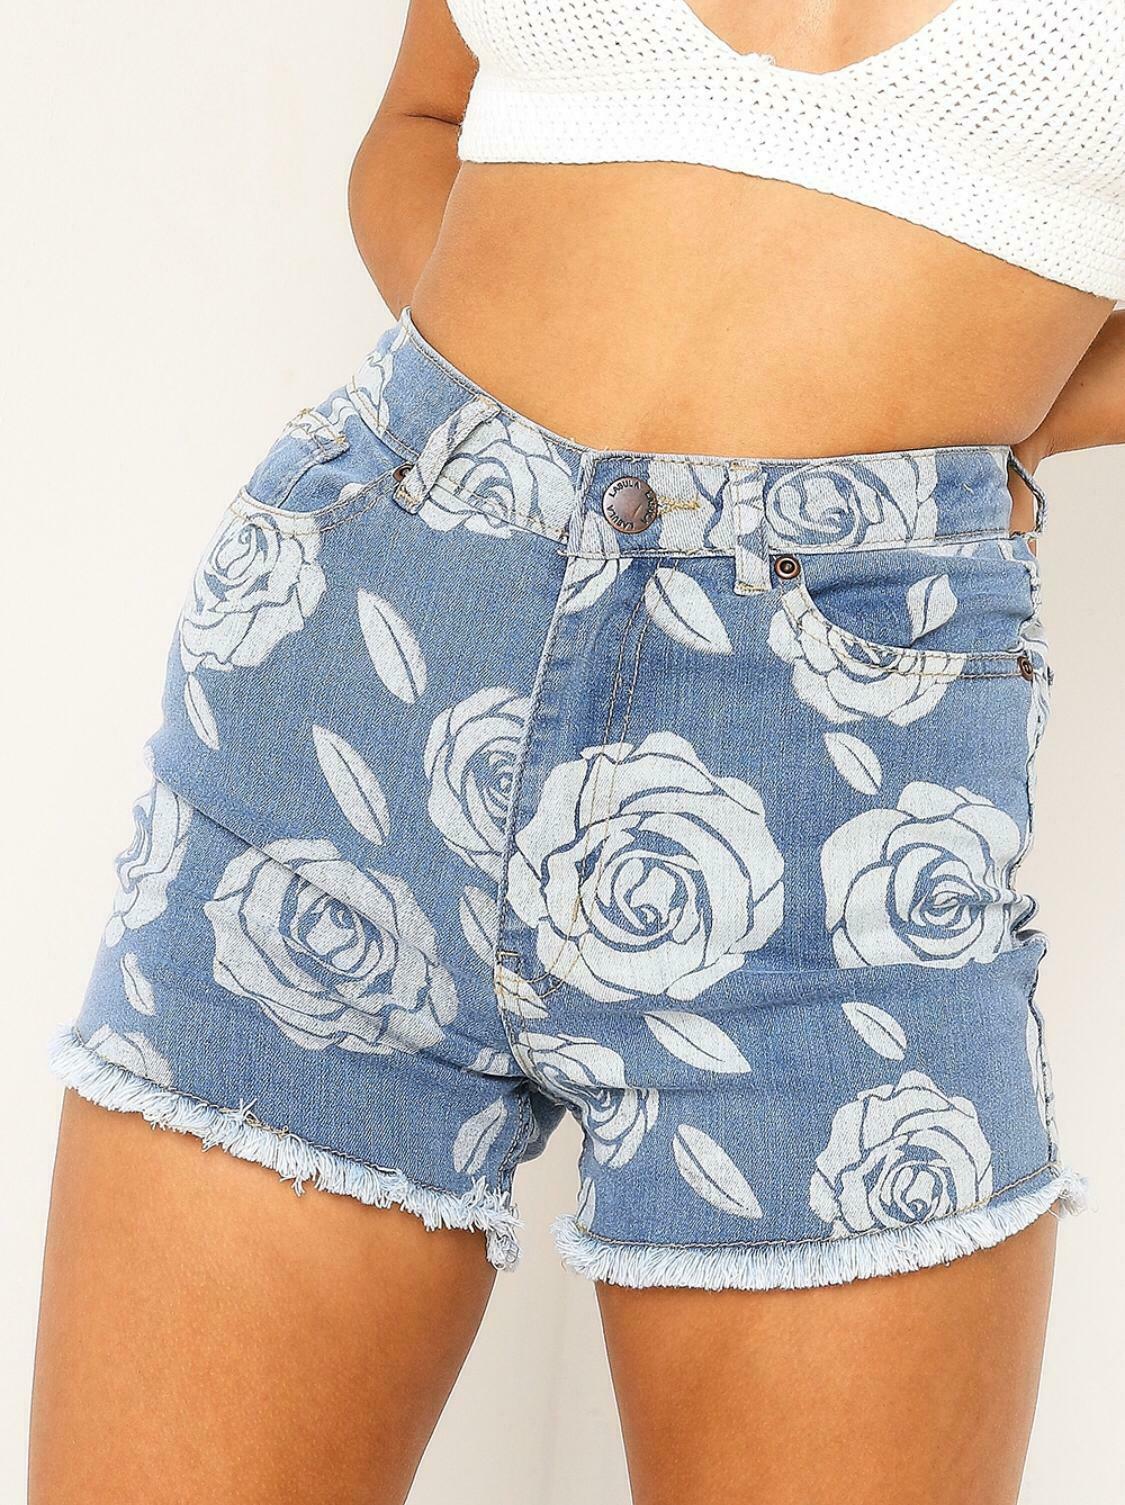 Ladies Flower Design Denim Hot Pants. Available In Sizes 6-16.